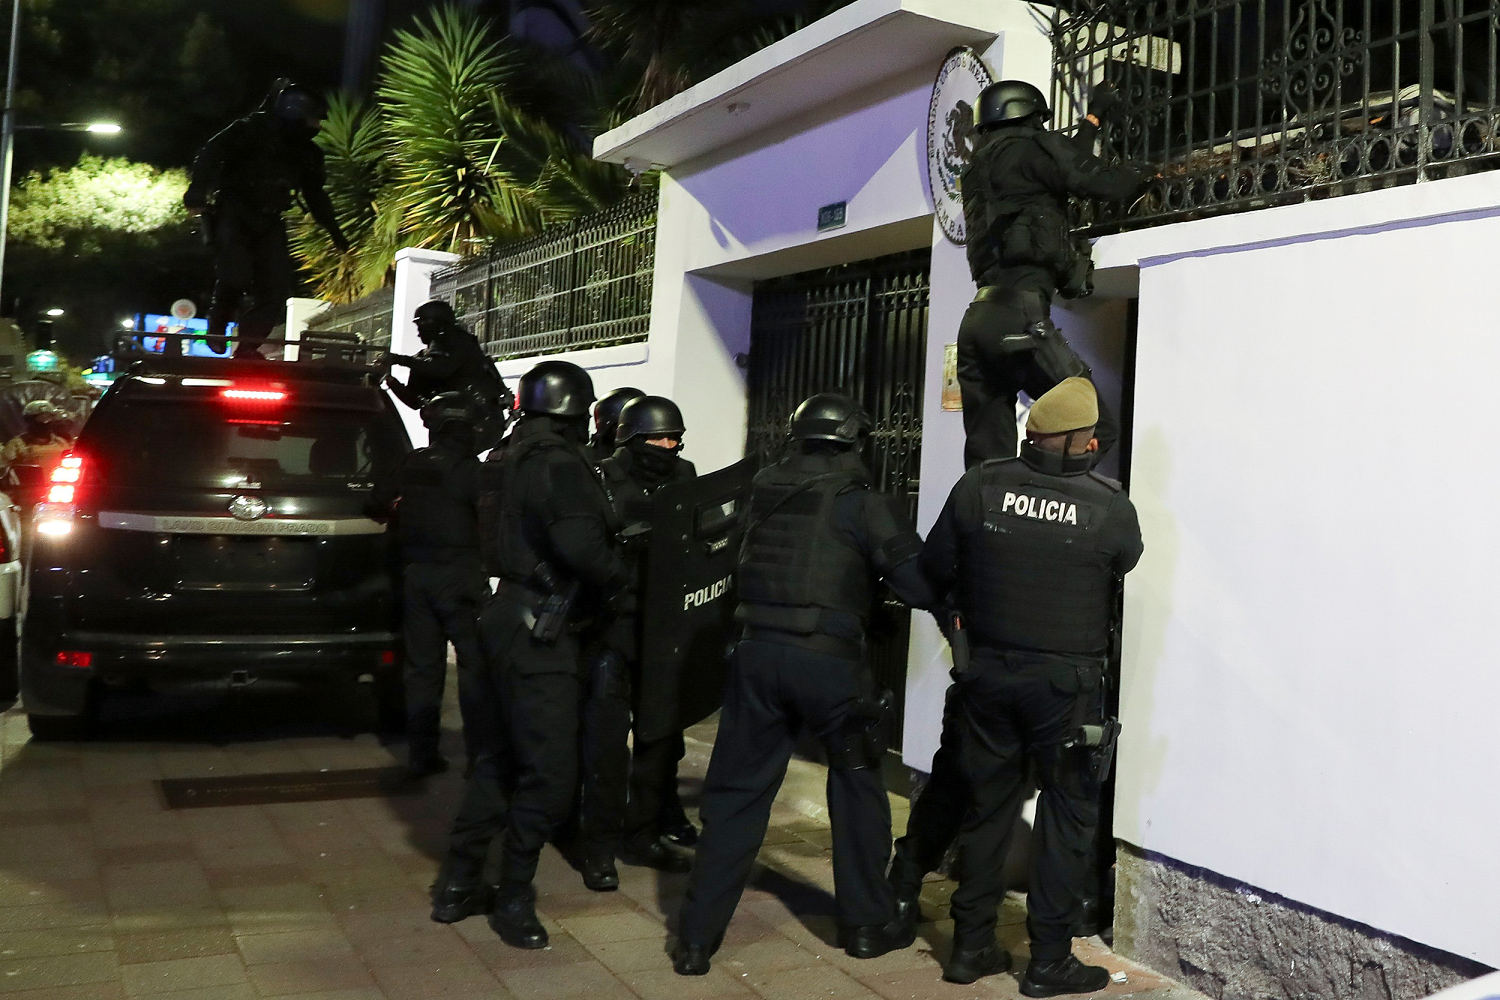 Mexico releases video of Ecuadorian police raiding its embassy in Quito